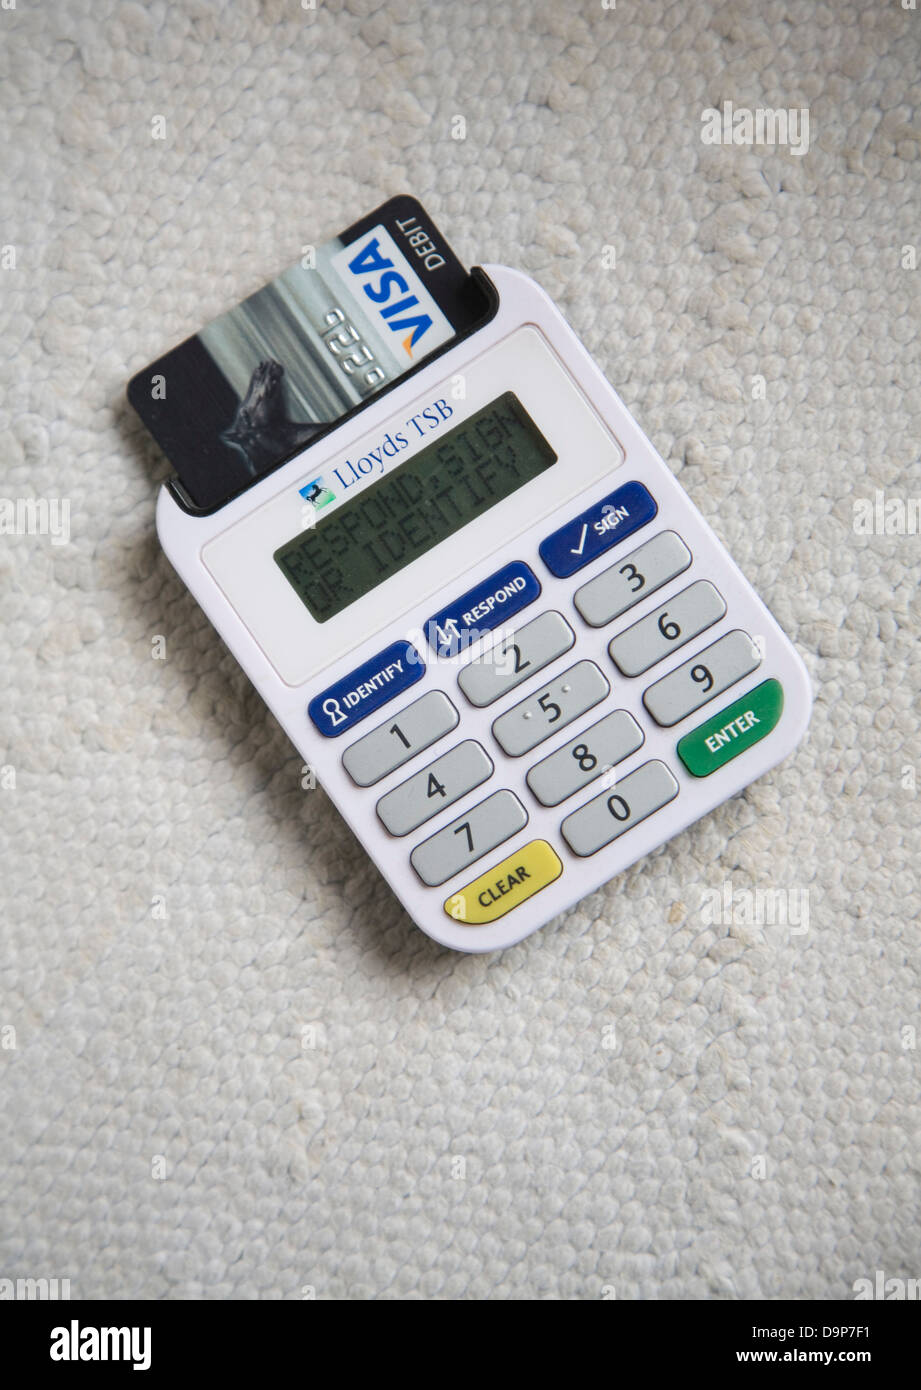 Ezio Lloyds Bank card reader online banking security device Stock Photo